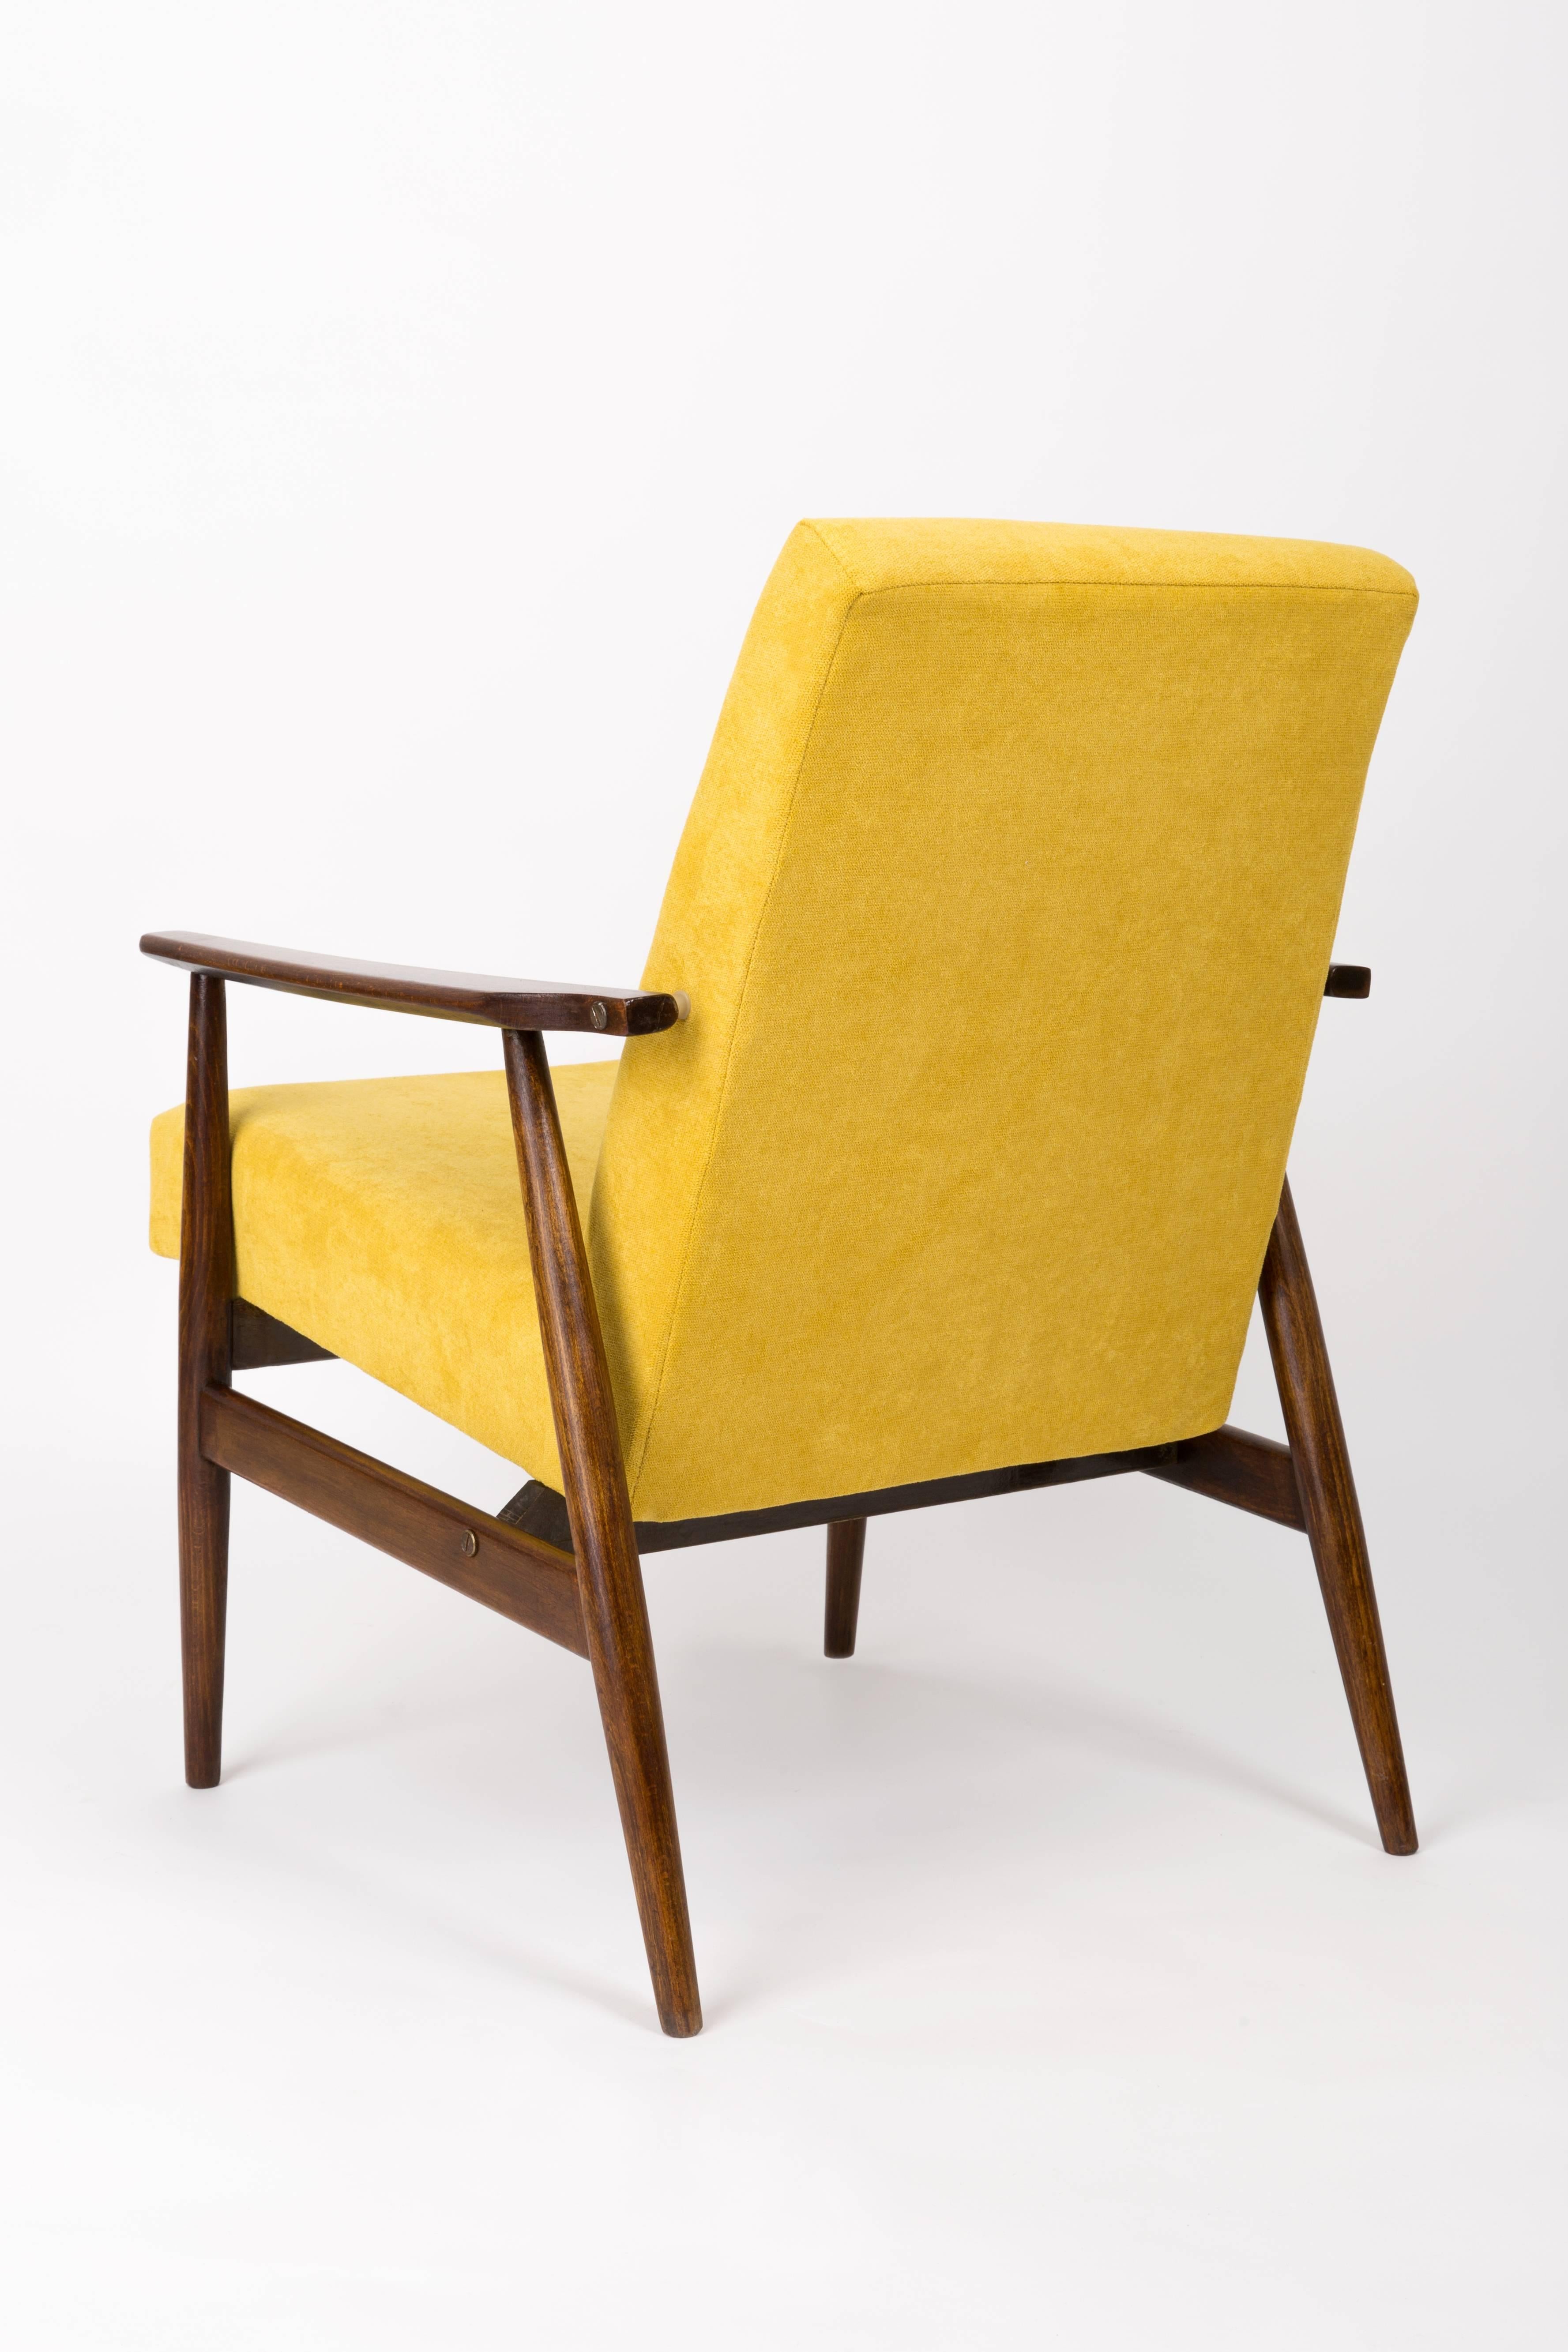 Textile Pair of Mid Century Yellow Dante Armchairs, H. Lis, Europe, 1960s. For Sale